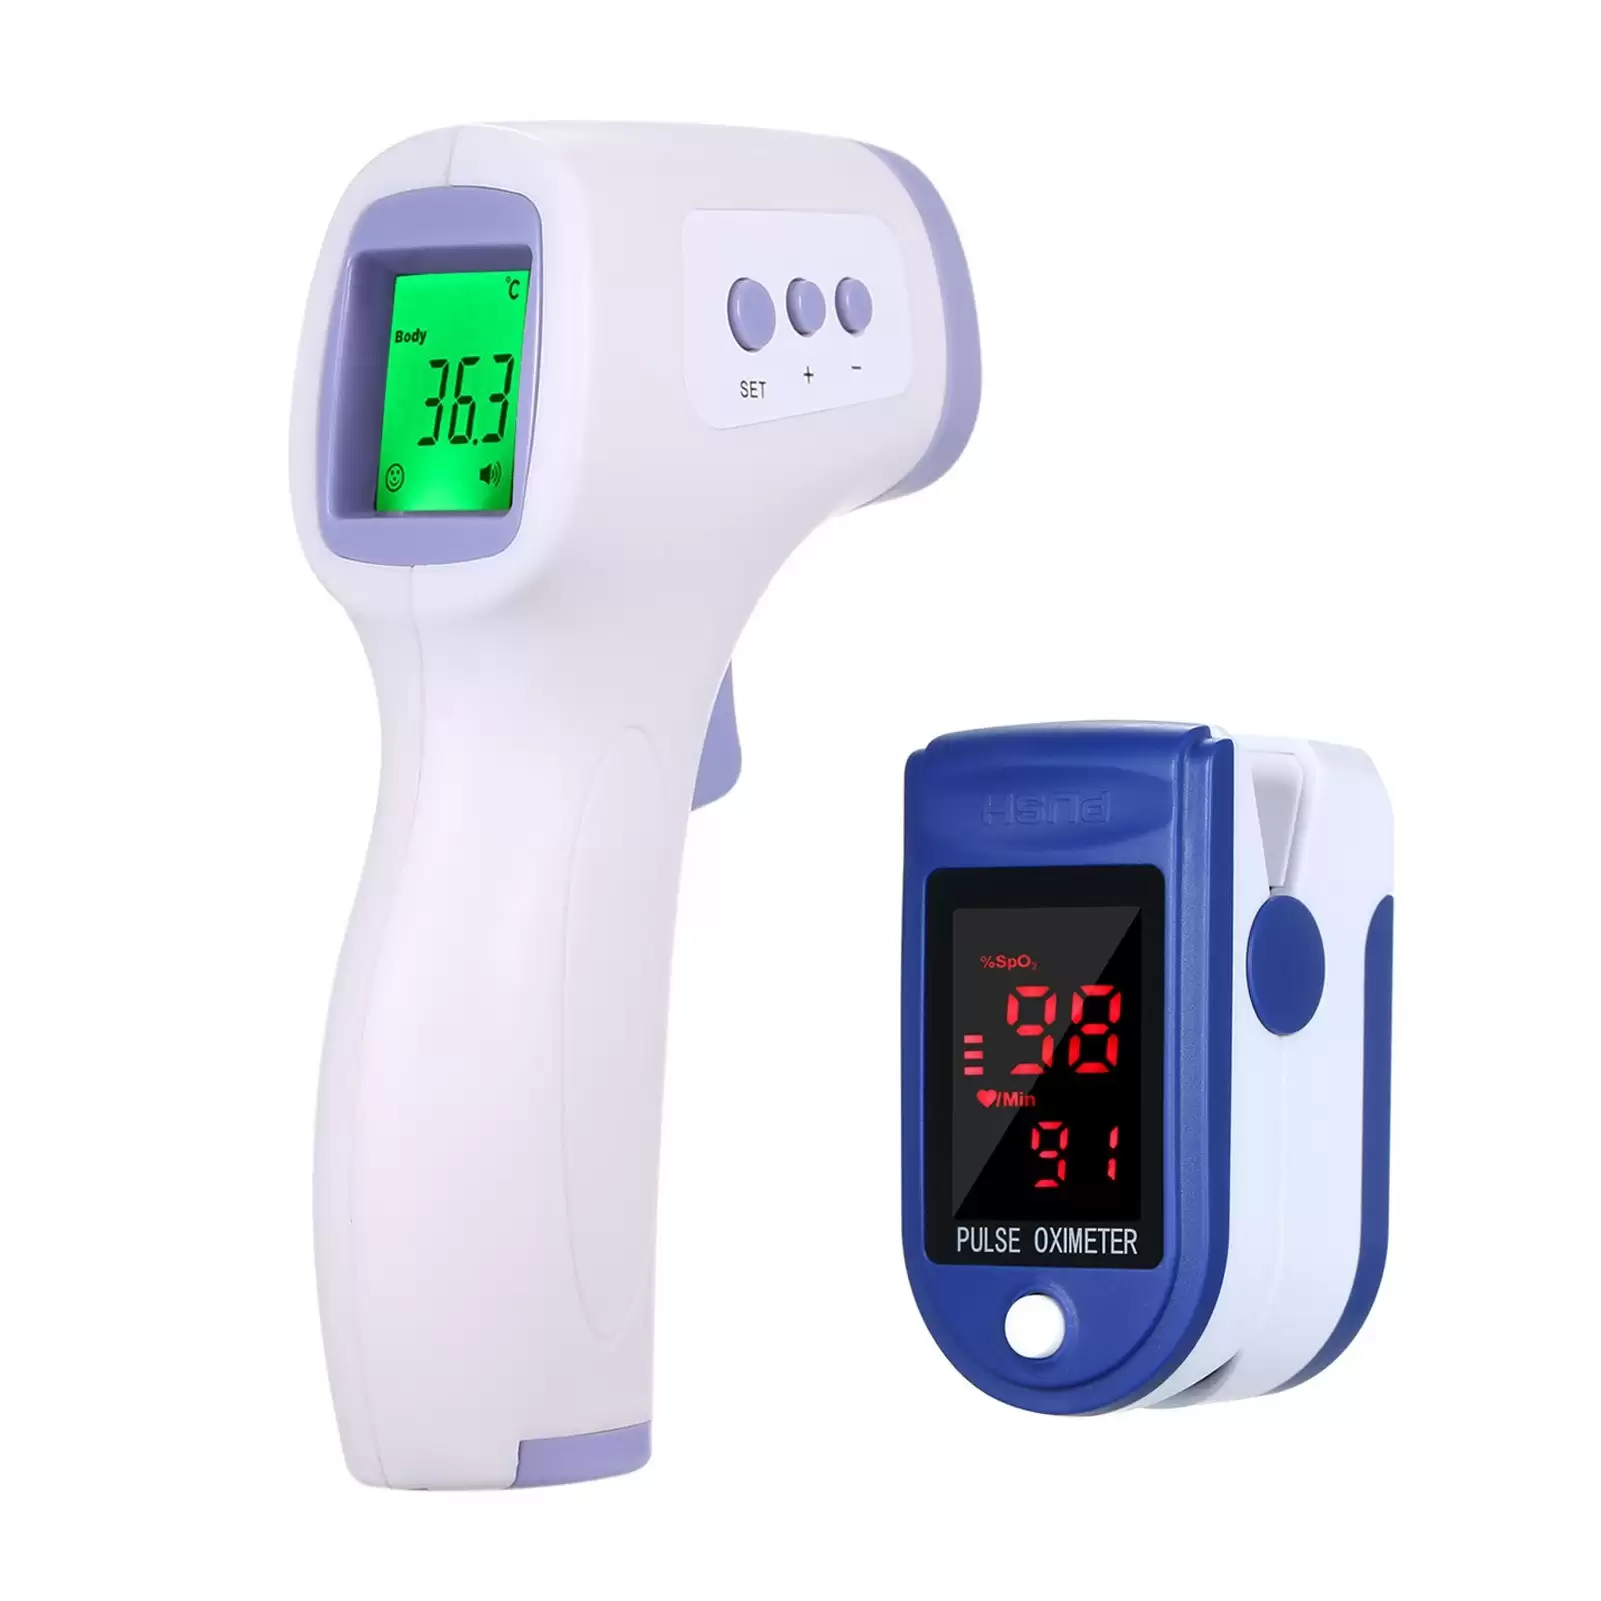 Get Extra 51% Discount On Thermometer + Fingertip Clip Pulse Oximeter Limited Offers $13.99 With This Coupon Code At Tomtop